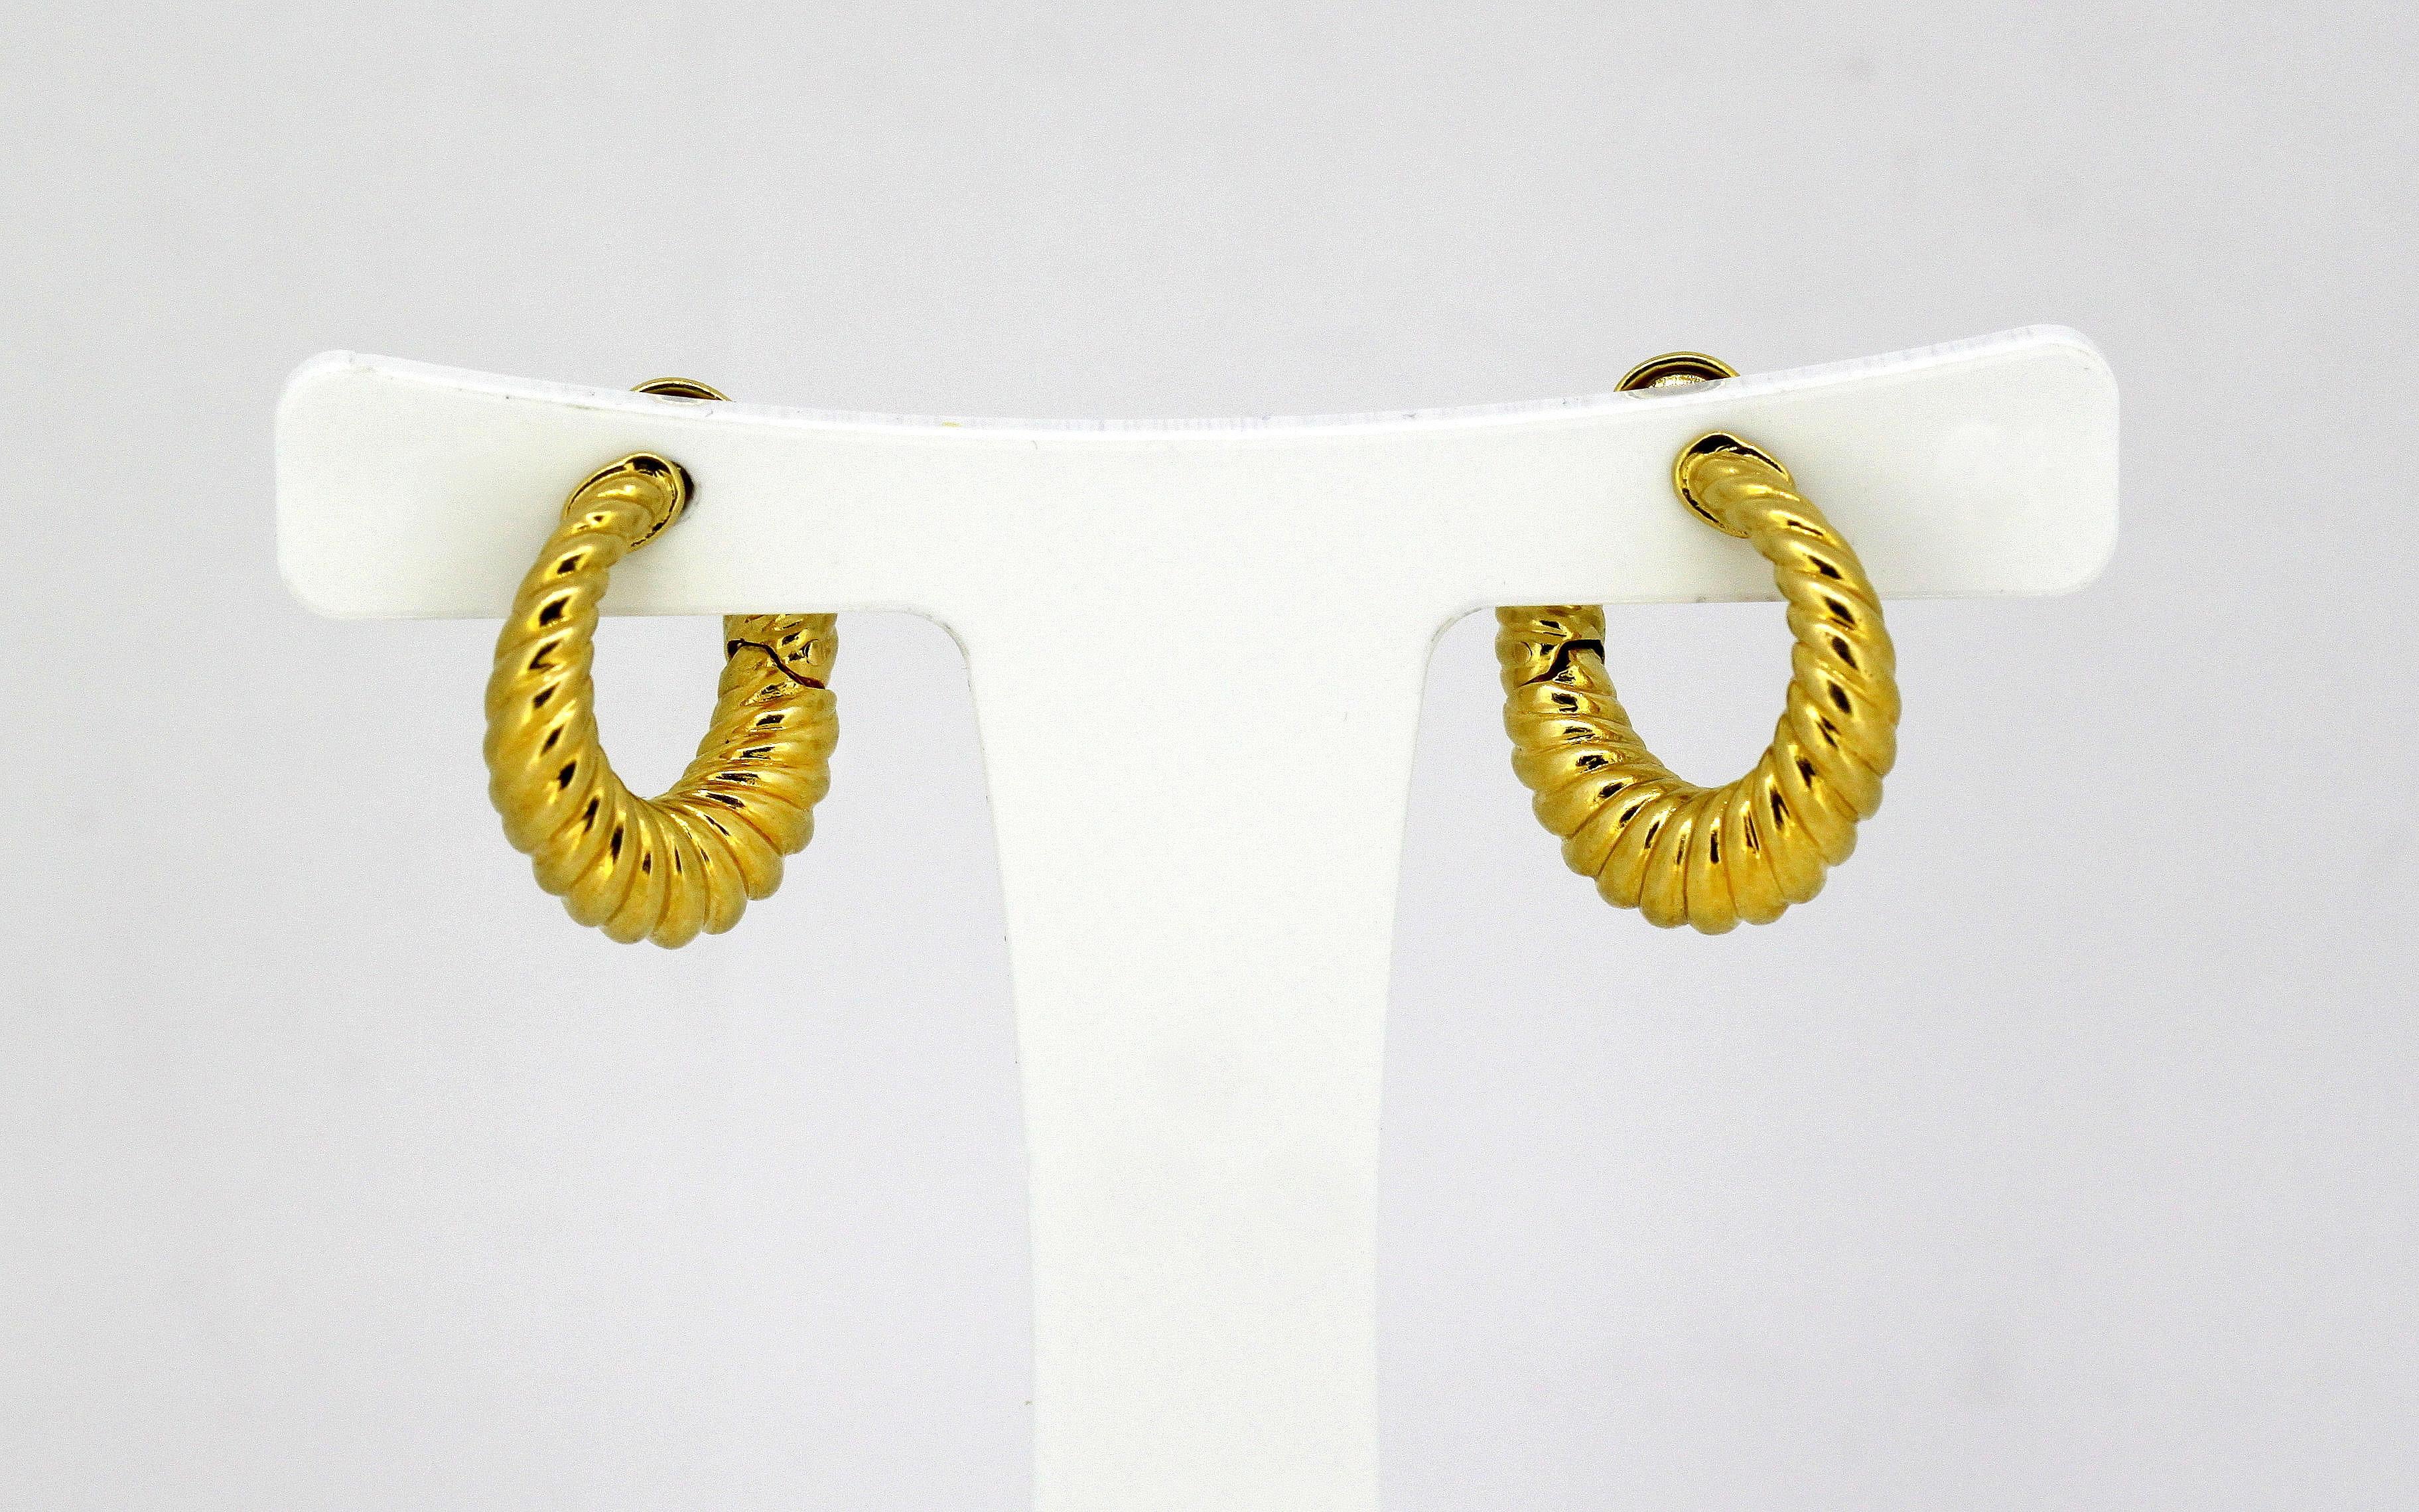 18k yellow gold ladies earrings. 
Designer : Van Cleef & Arpels 
Made in France Circa 1990's 
Fully hallmarked. 

Dimension - 
Size : 2.3 x 2 x 0.4 cm 
Weight : 12 grams 

Condition: Earrings are pre-owned, have some minor signs of usage, no damage,